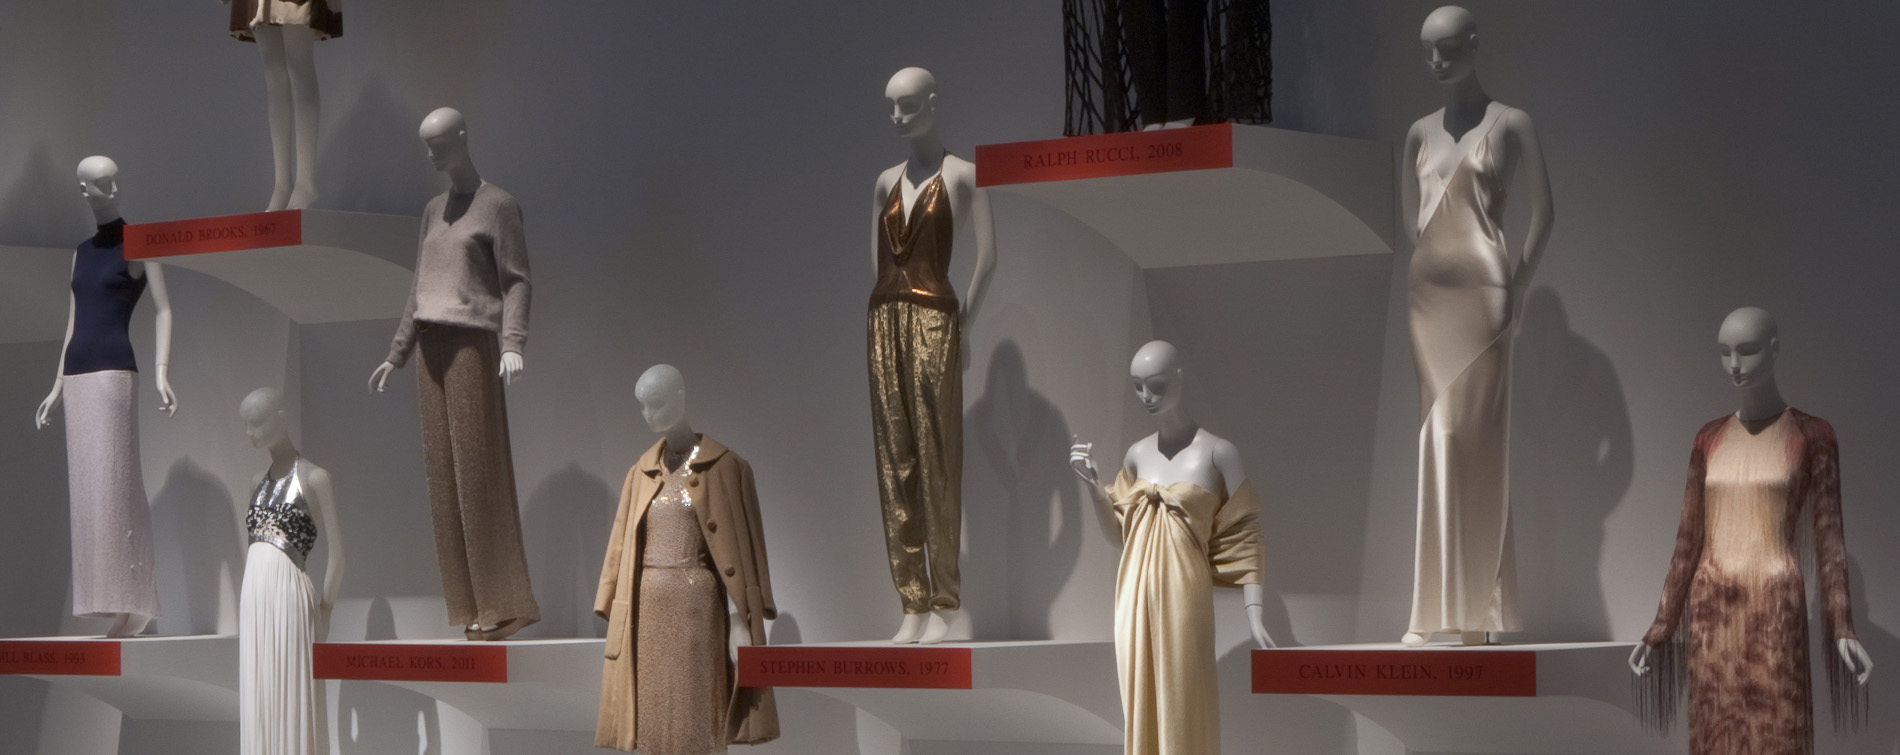 various mannequins wearing evening dresses and ensembles on platforms fixed onto a wall